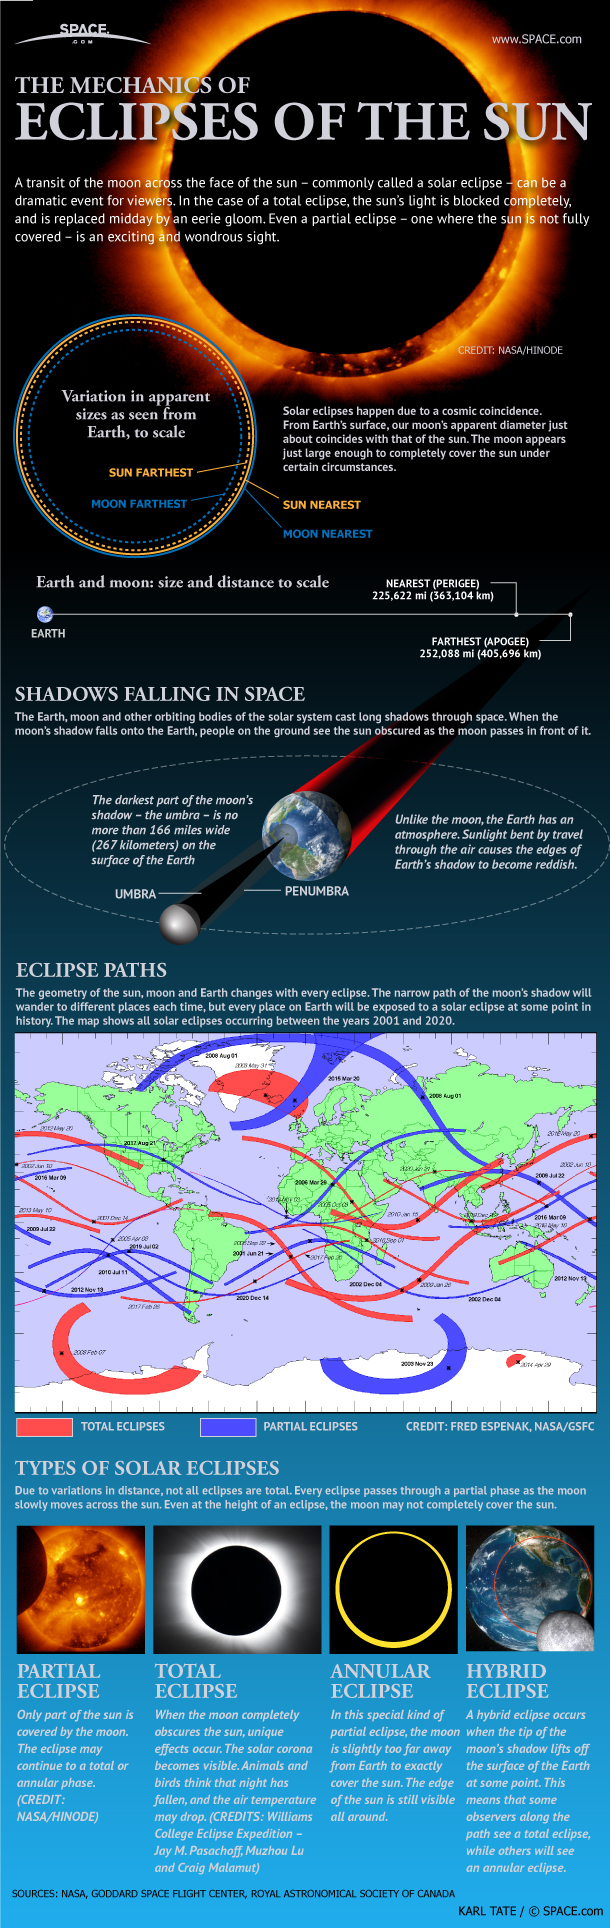 Guide to Solar Eclipses (Infographic) Guide to Solar Eclipses (Infographic)